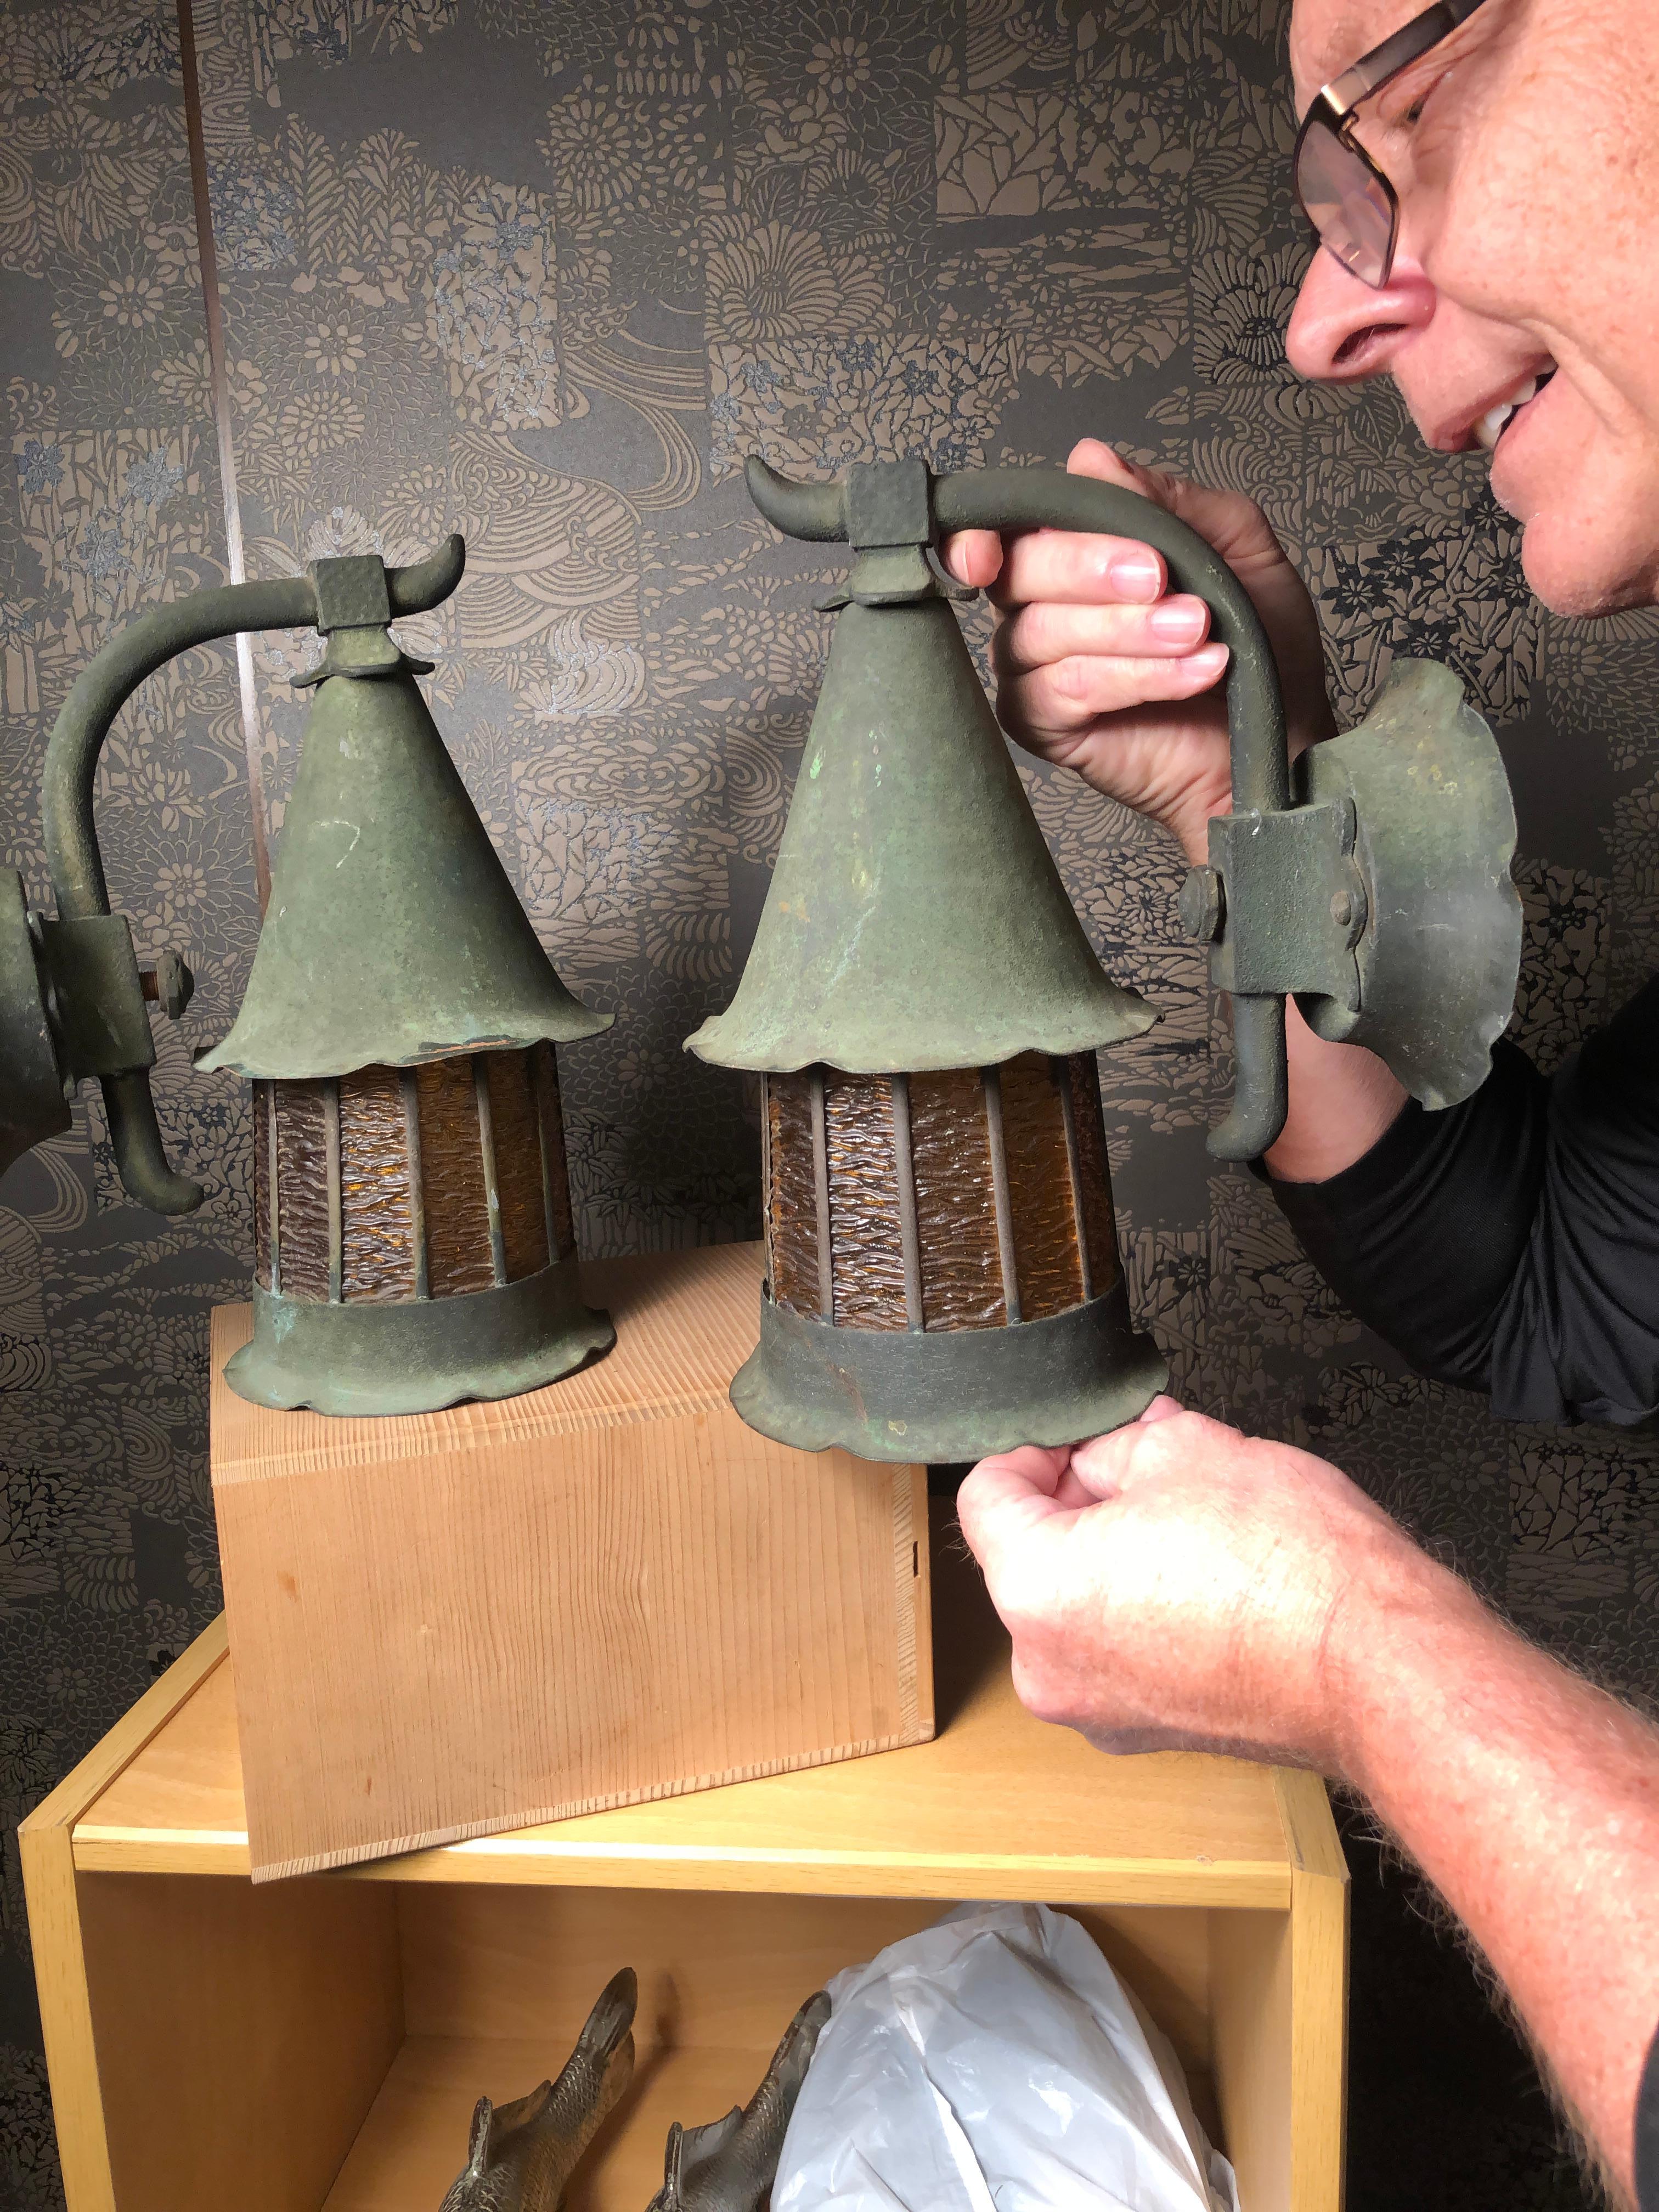 Japan, a handsome high quality pair of large bronze light fixtures and sconces  with their original amber glass and wall mounting hardware in tact, circa 1920s.

Superb originl green patina

Dimensions: 11.5 inches tall and 10 inches wide and